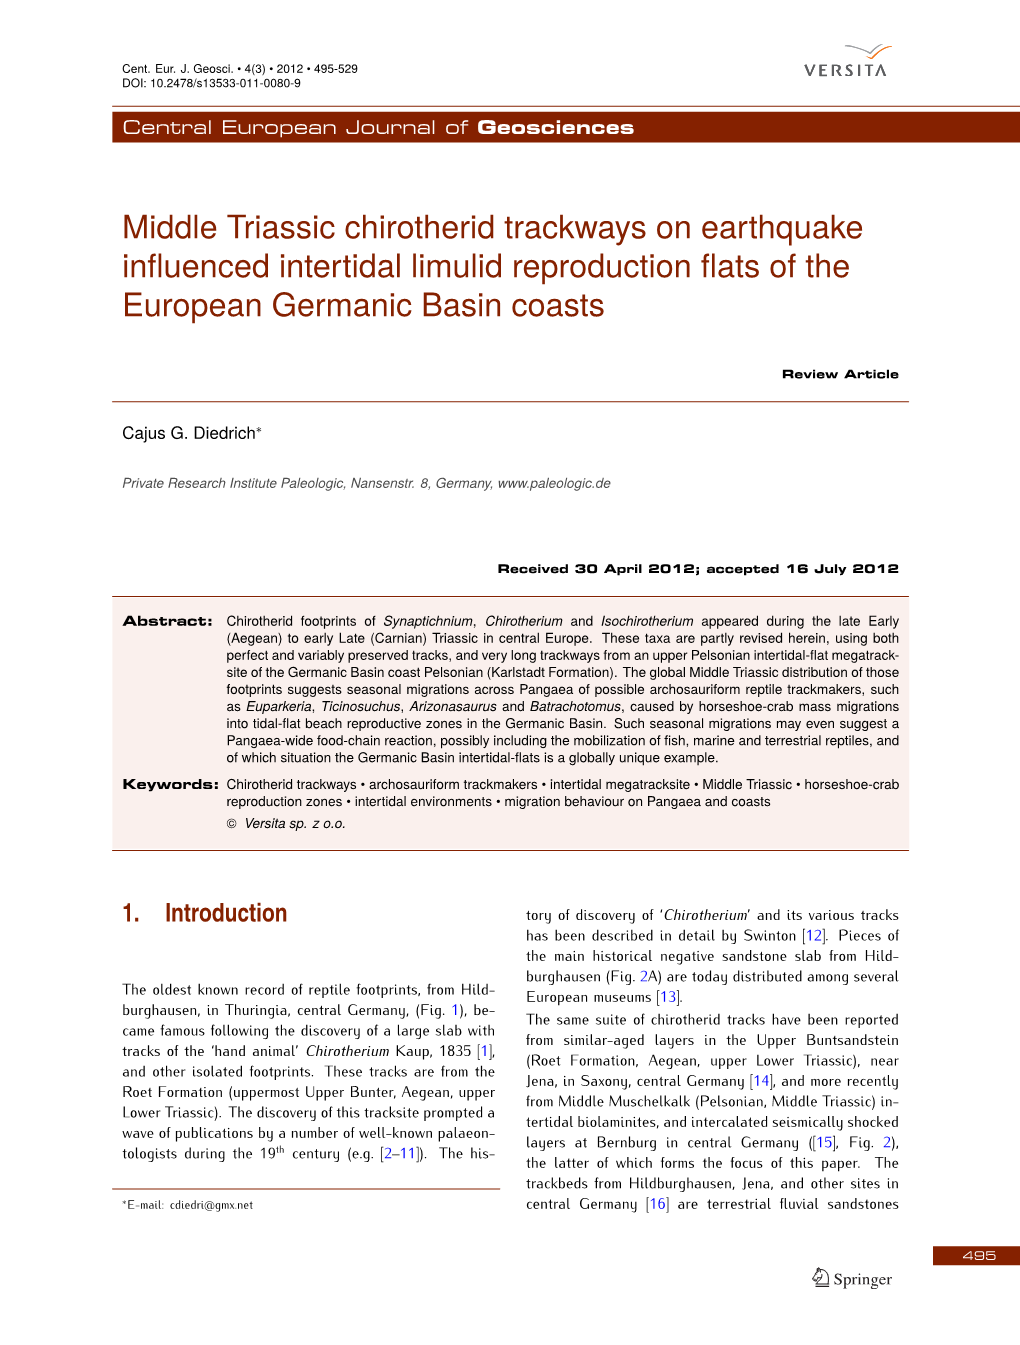 Middle Triassic Chirotherid Trackways on Earthquake Influenced Intertidal